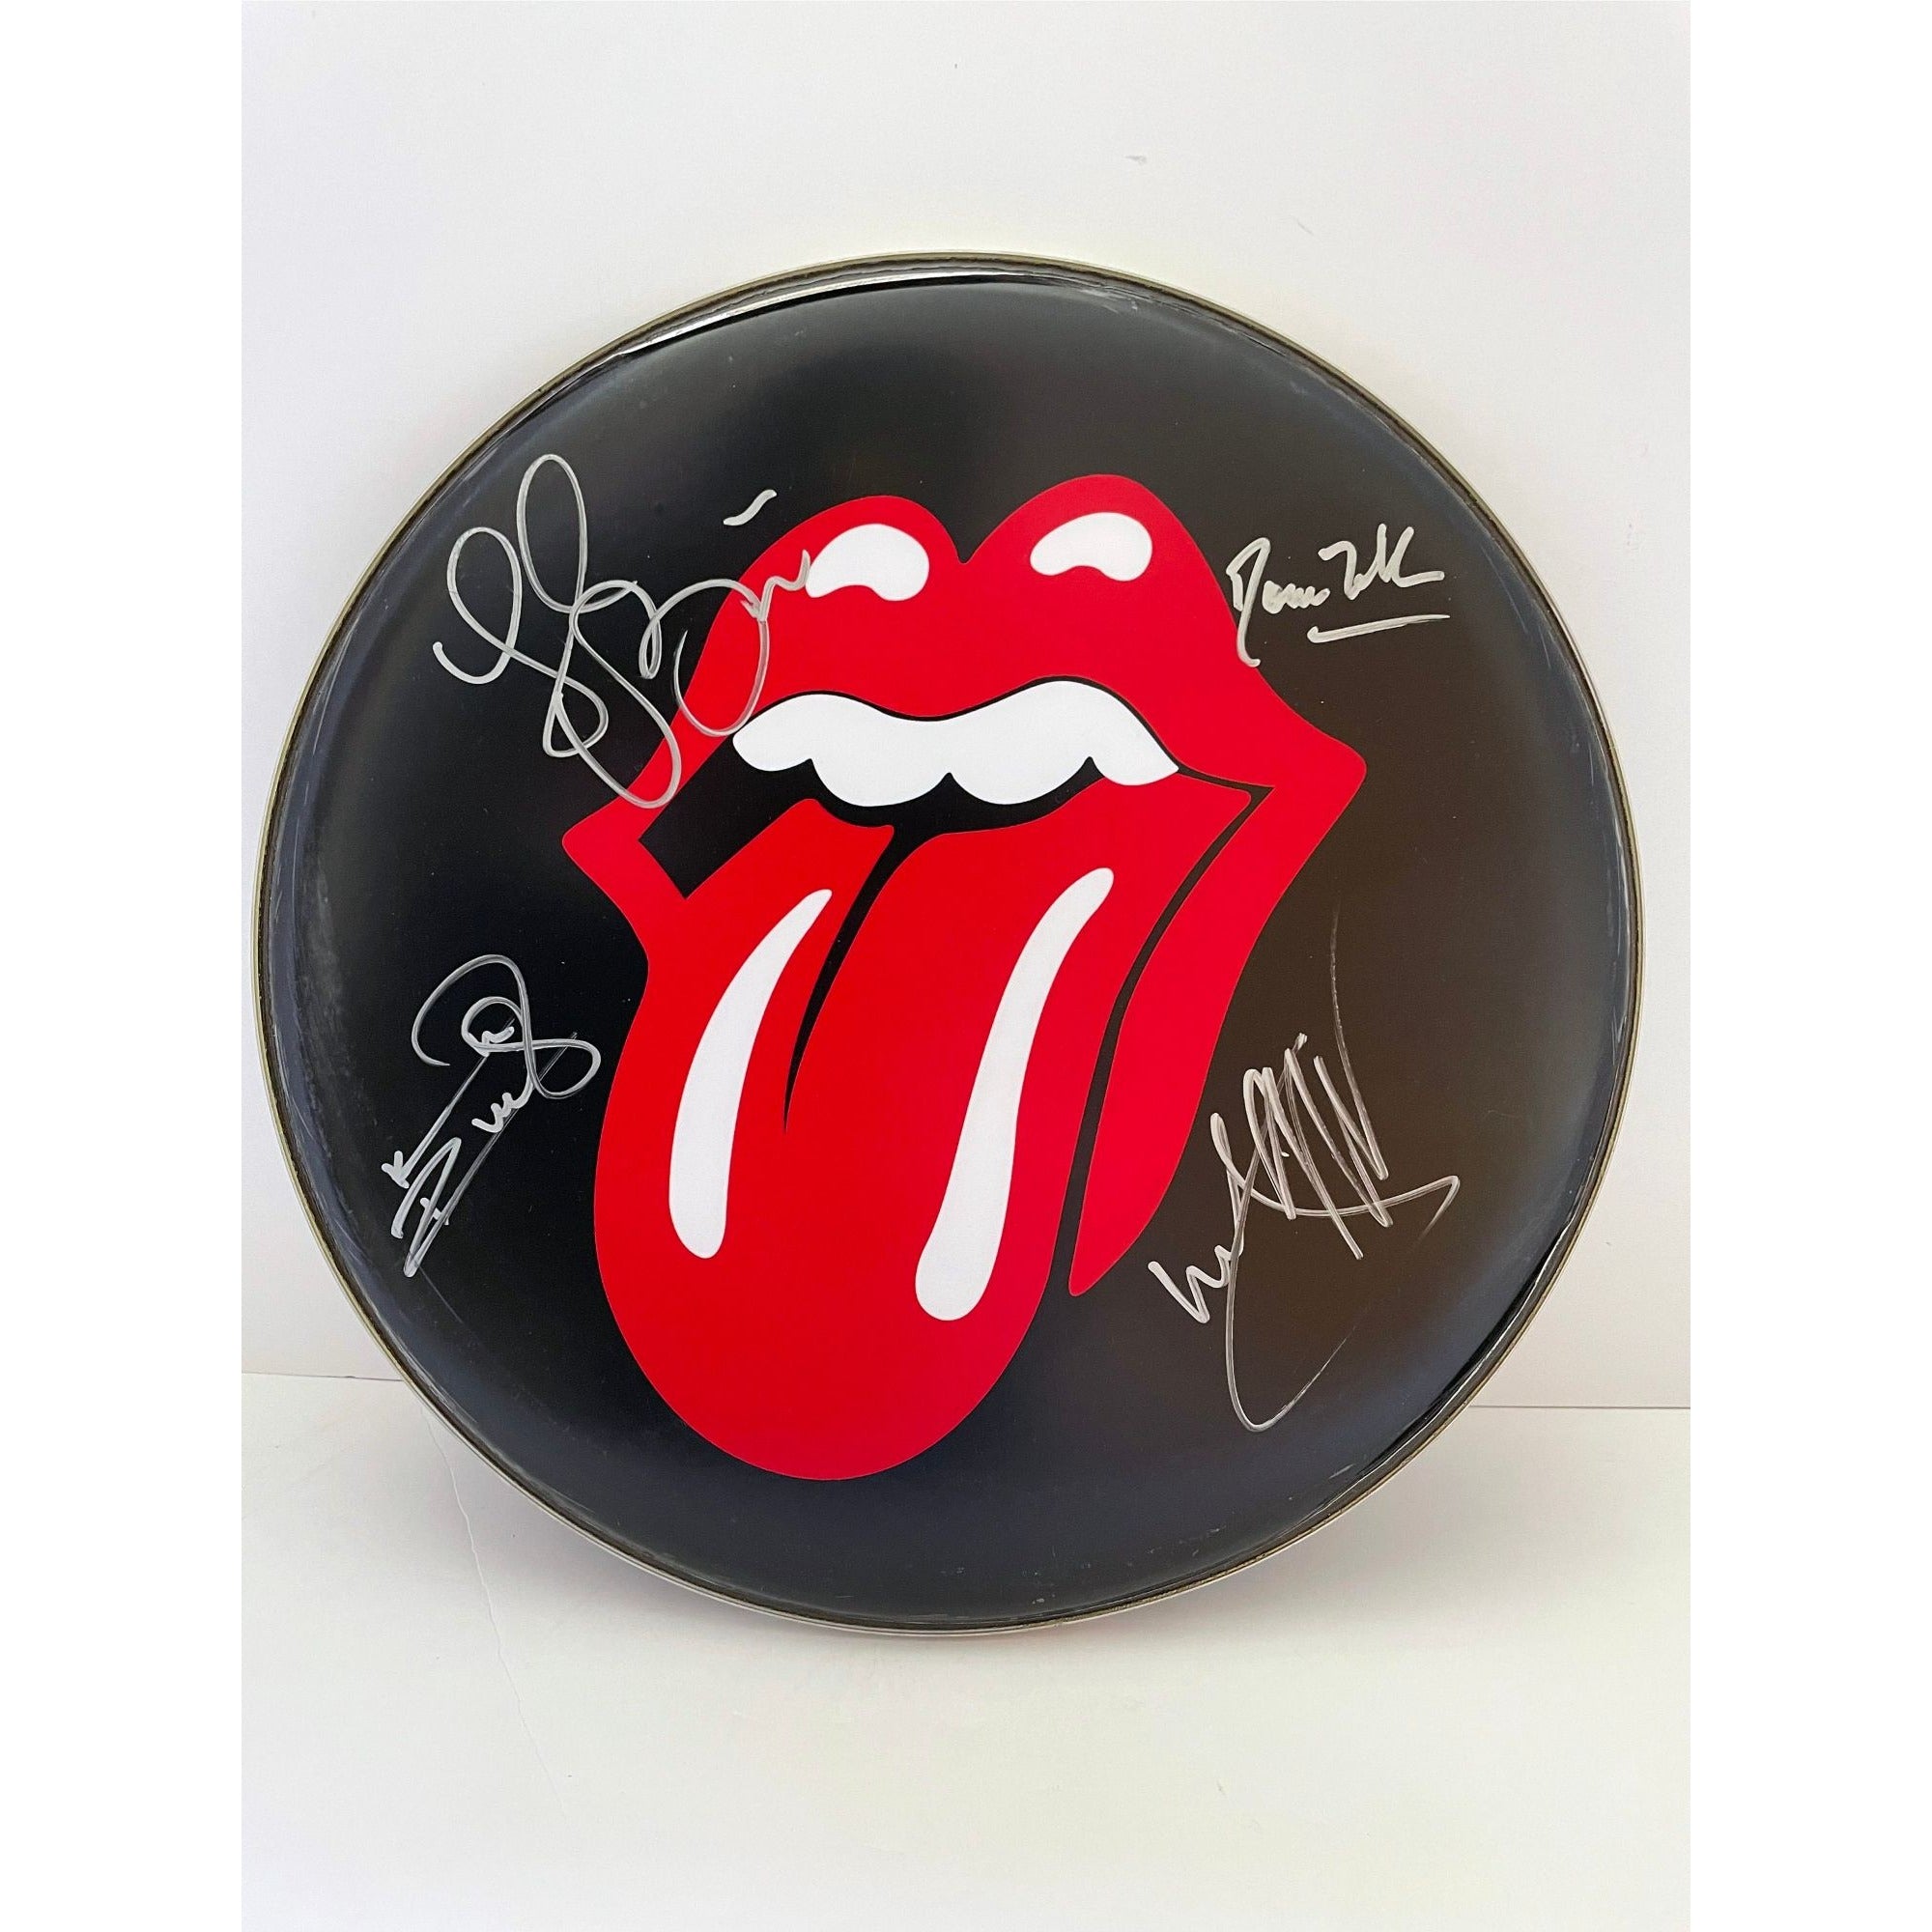 Bill Wyman Mick Jagger Keith Richards Ronnie Wood and Charlie Watts 14 inch drum head signed with proof